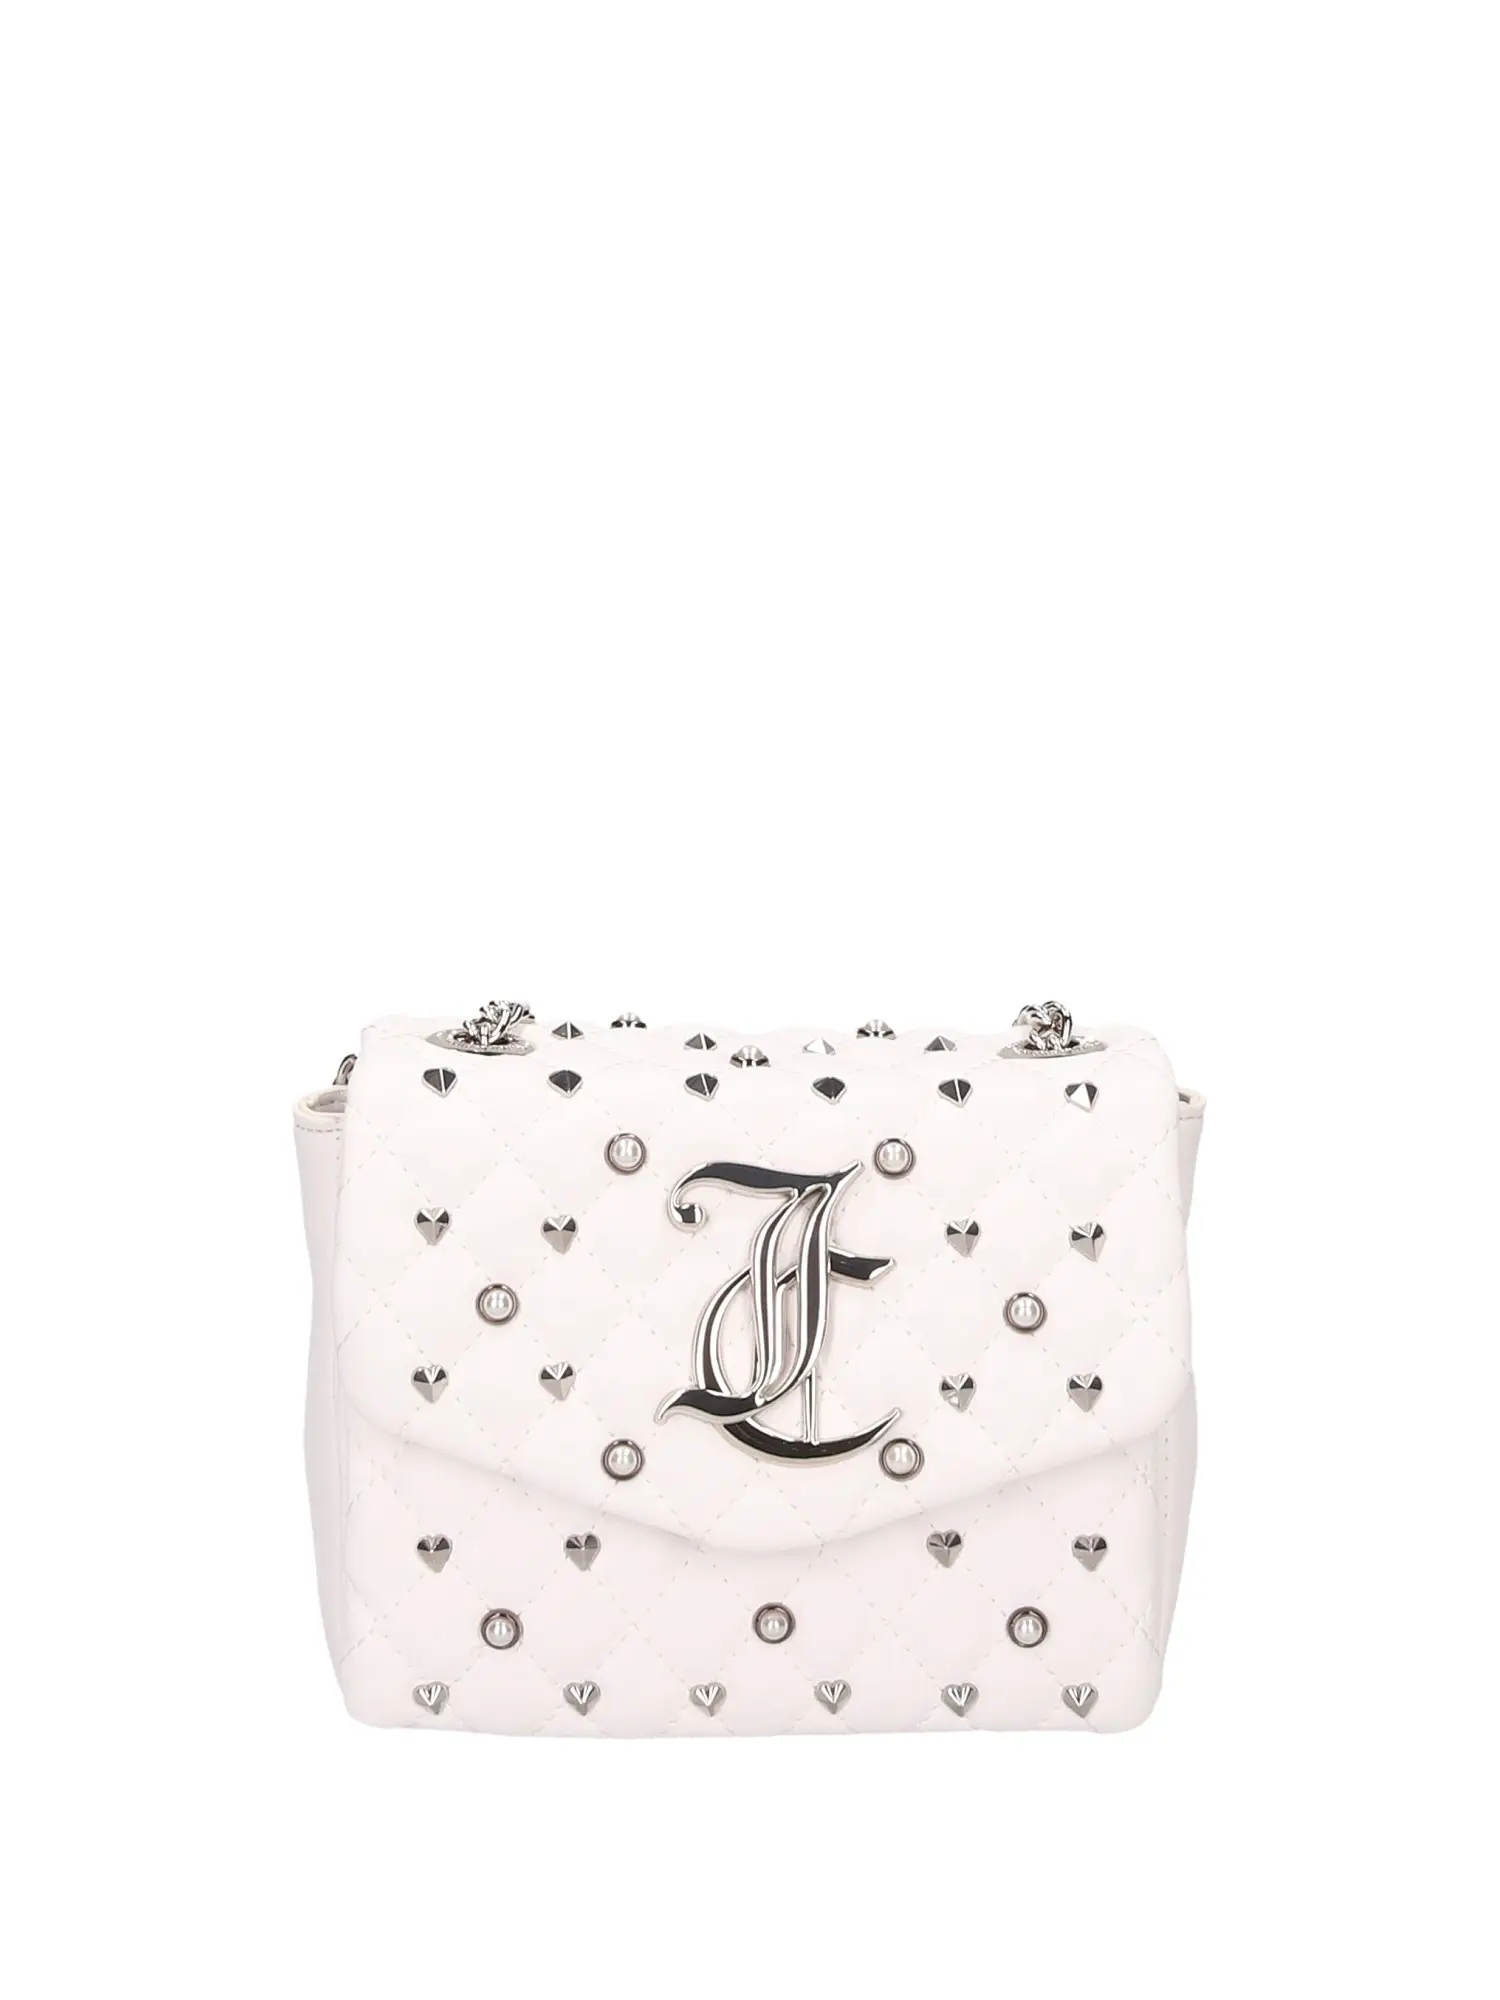 BORSA A SPALLA DONNA - JUICY COUTURE - BEJAY5474WVP - BIANCO, UNICA